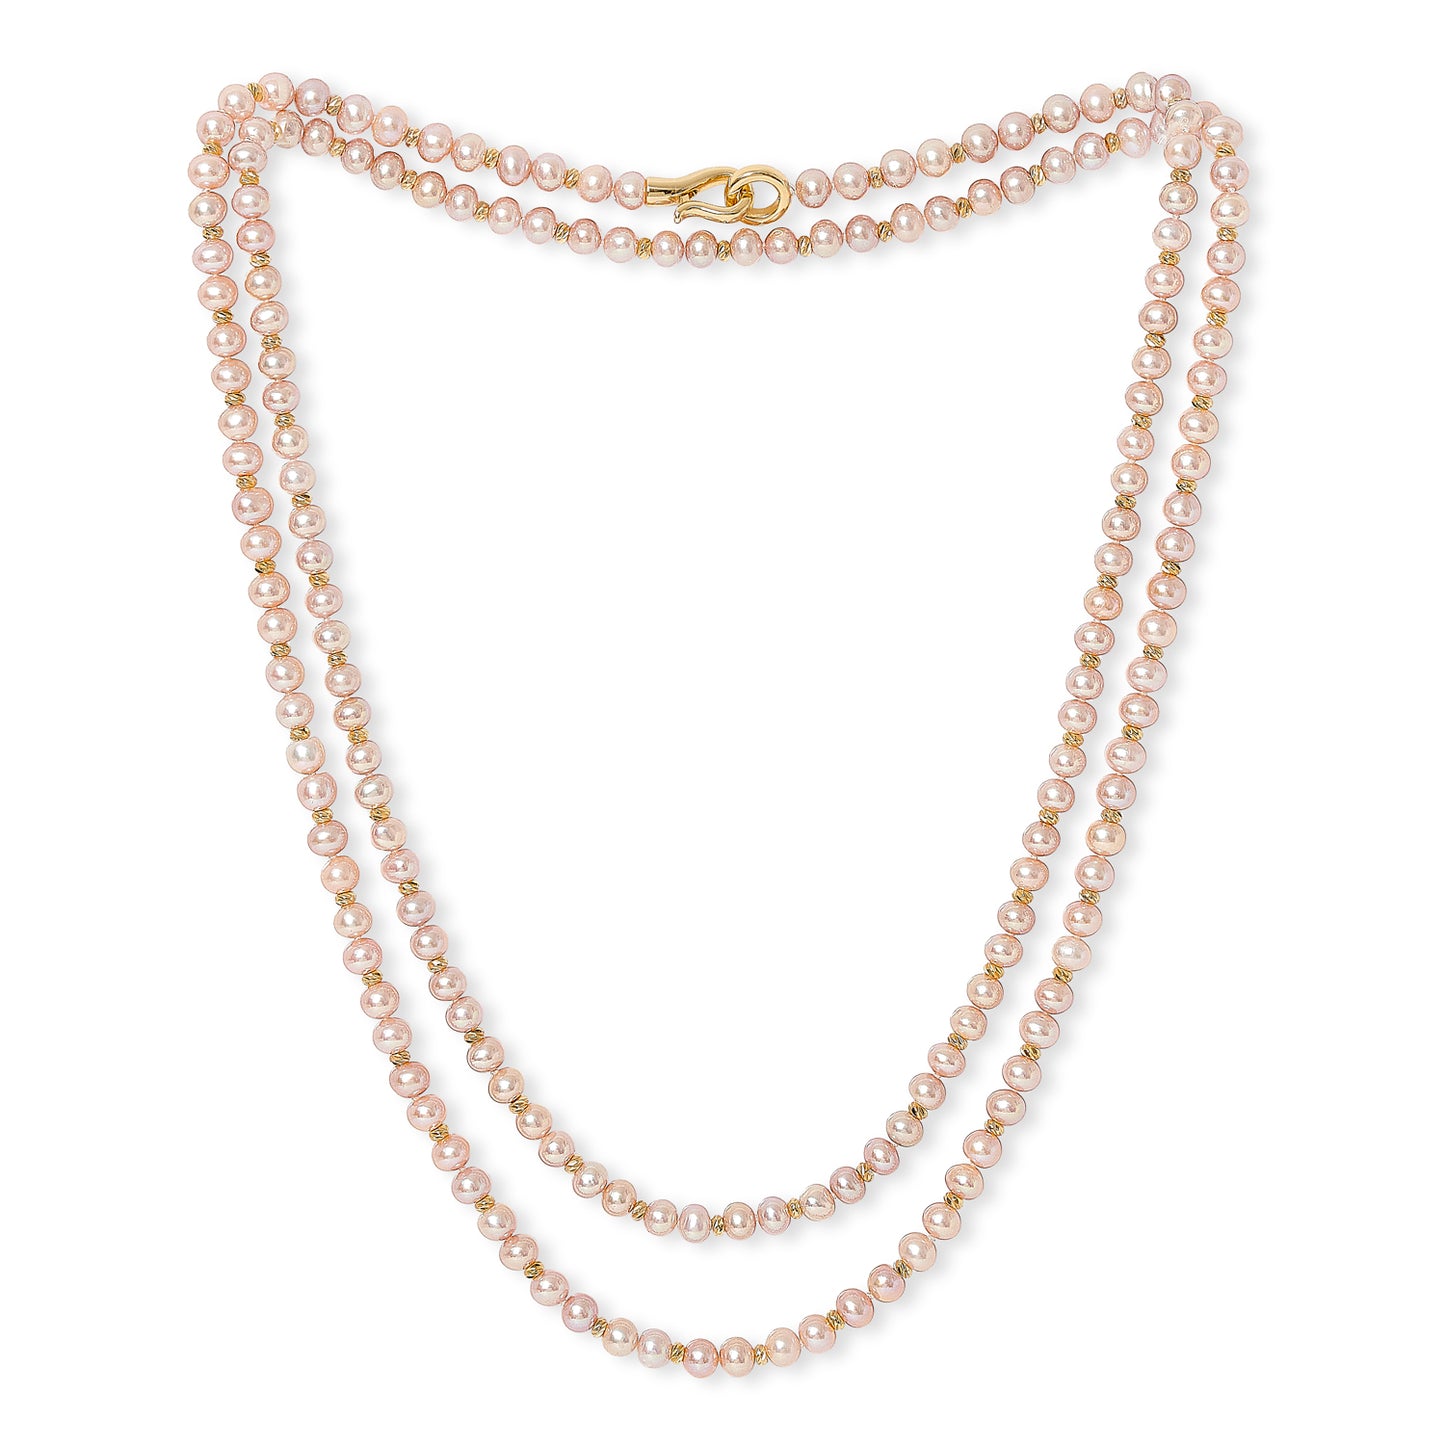 Gratia pink cultured freshwater pearl loop necklace with gold beads